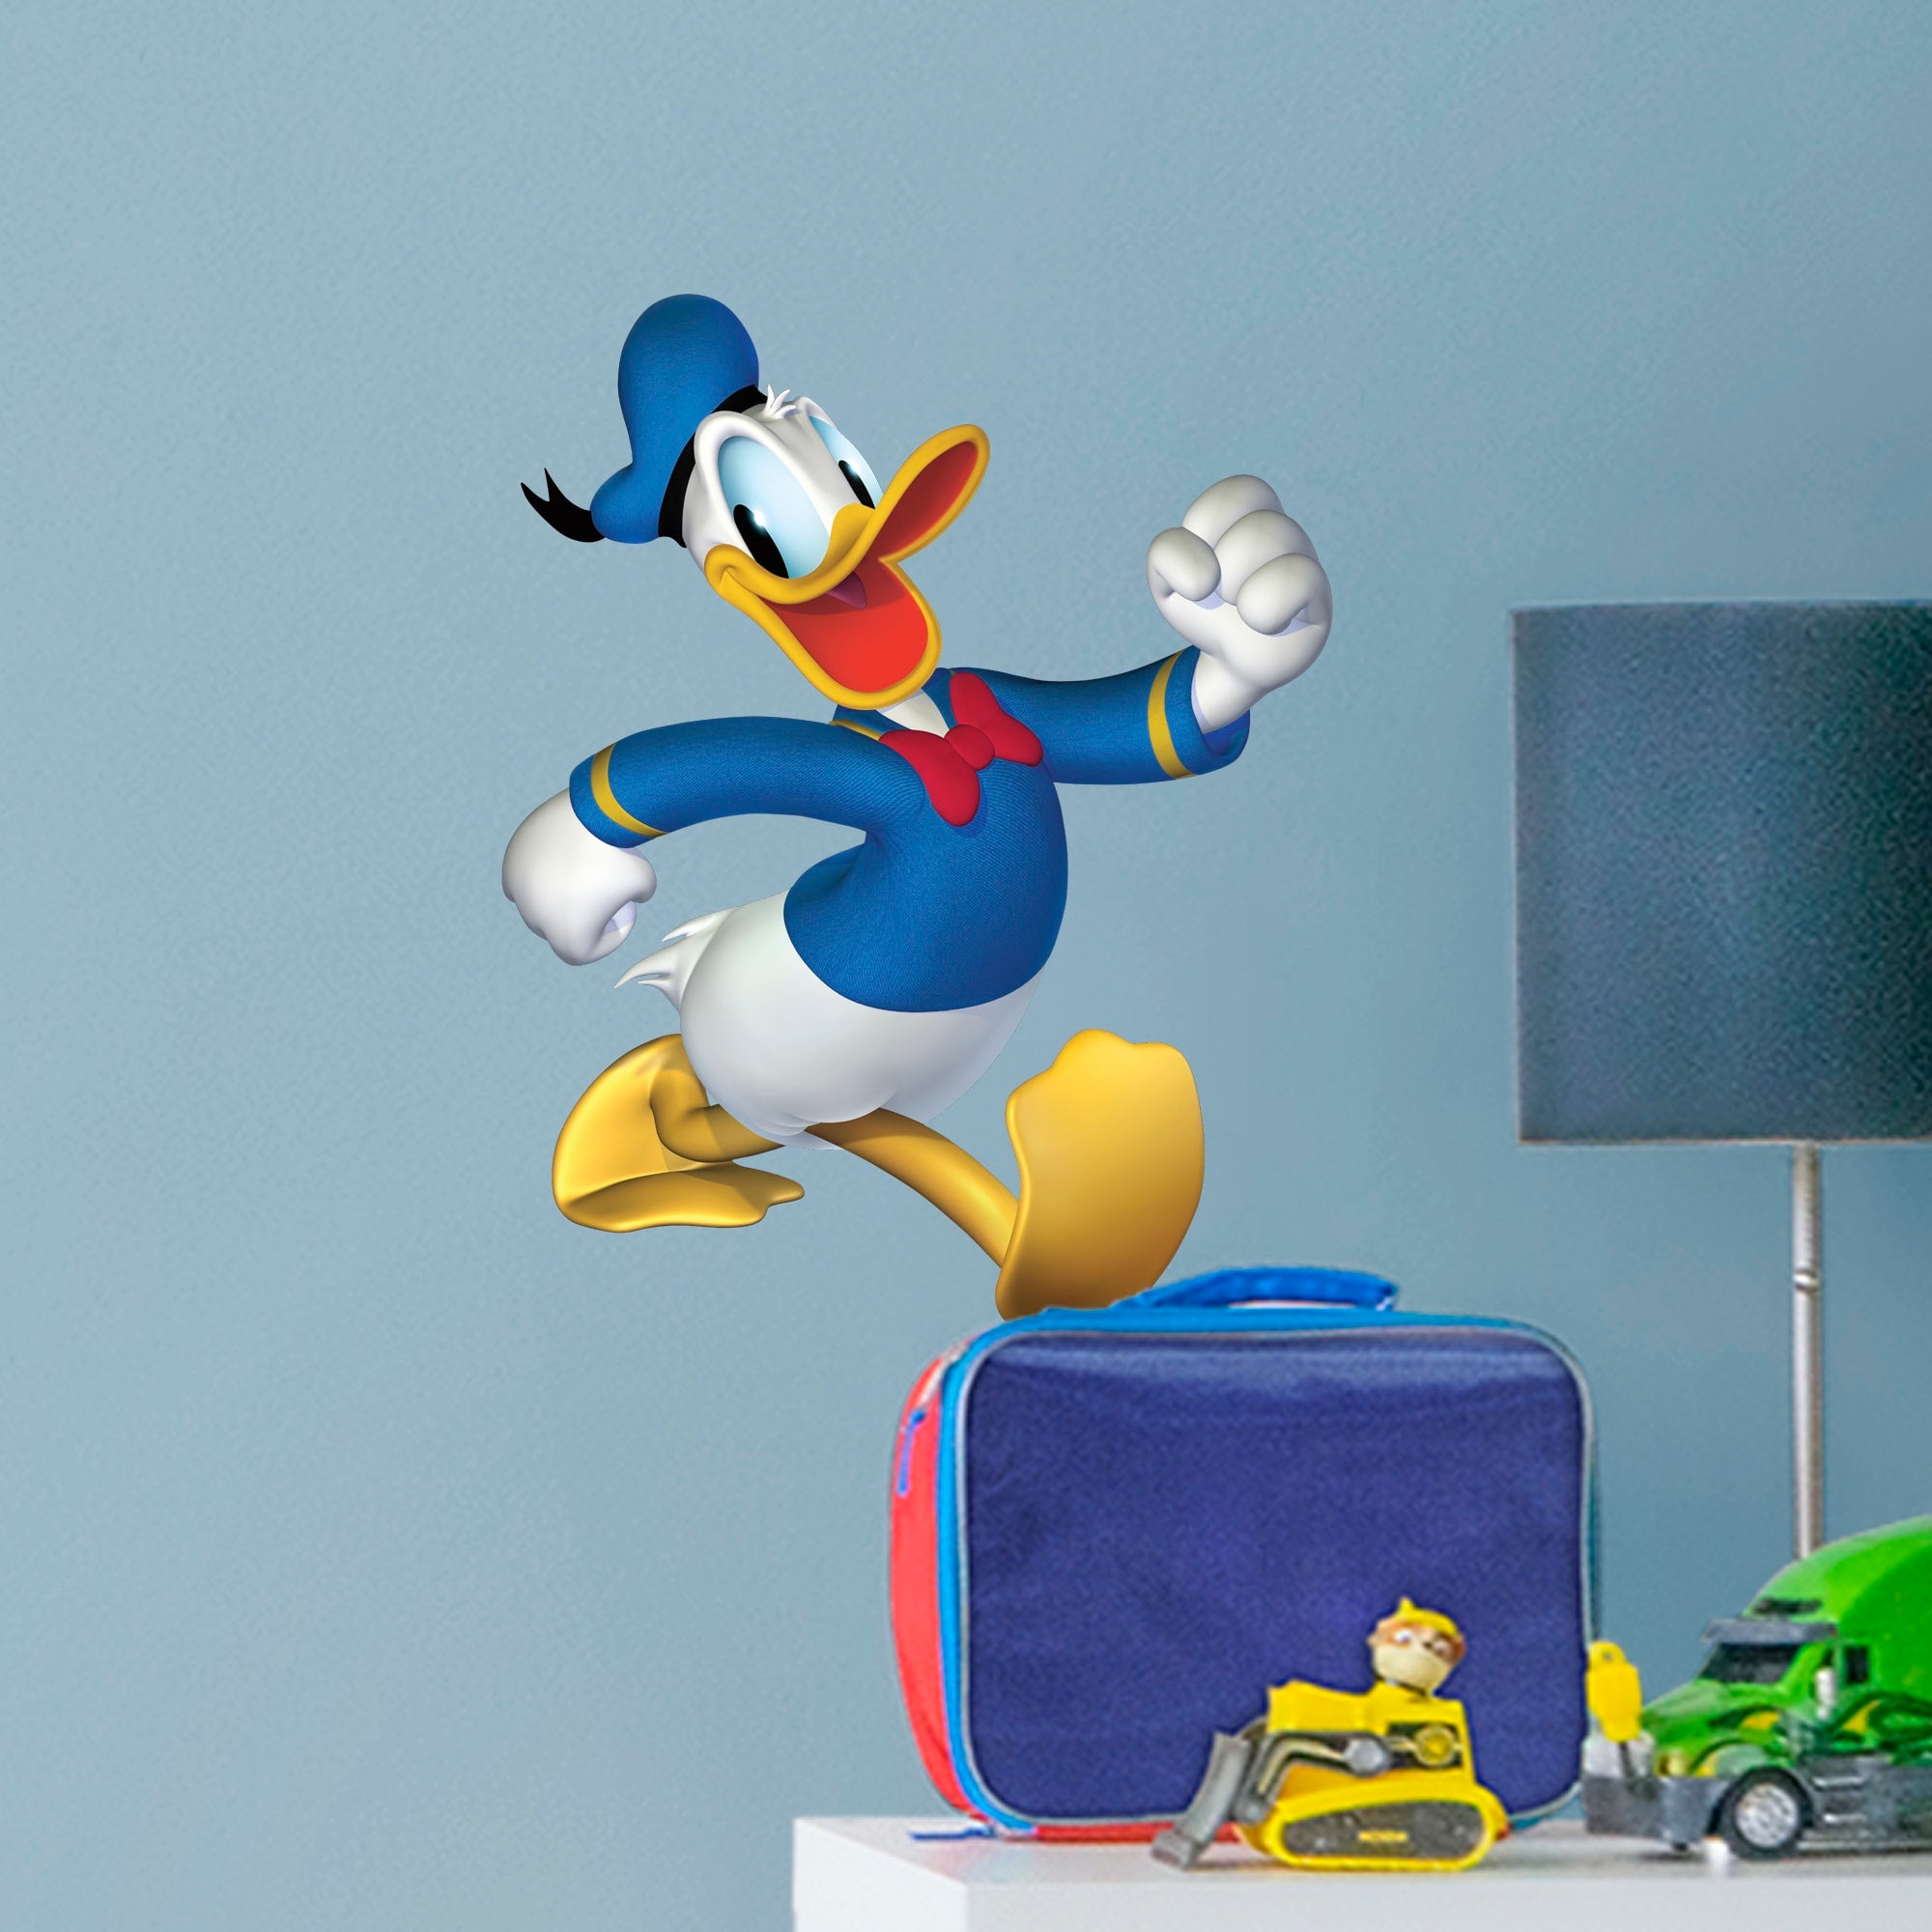 Donald Duck - Officially Licensed Disney Removable Wall Decal Large by Fathead | Vinyl